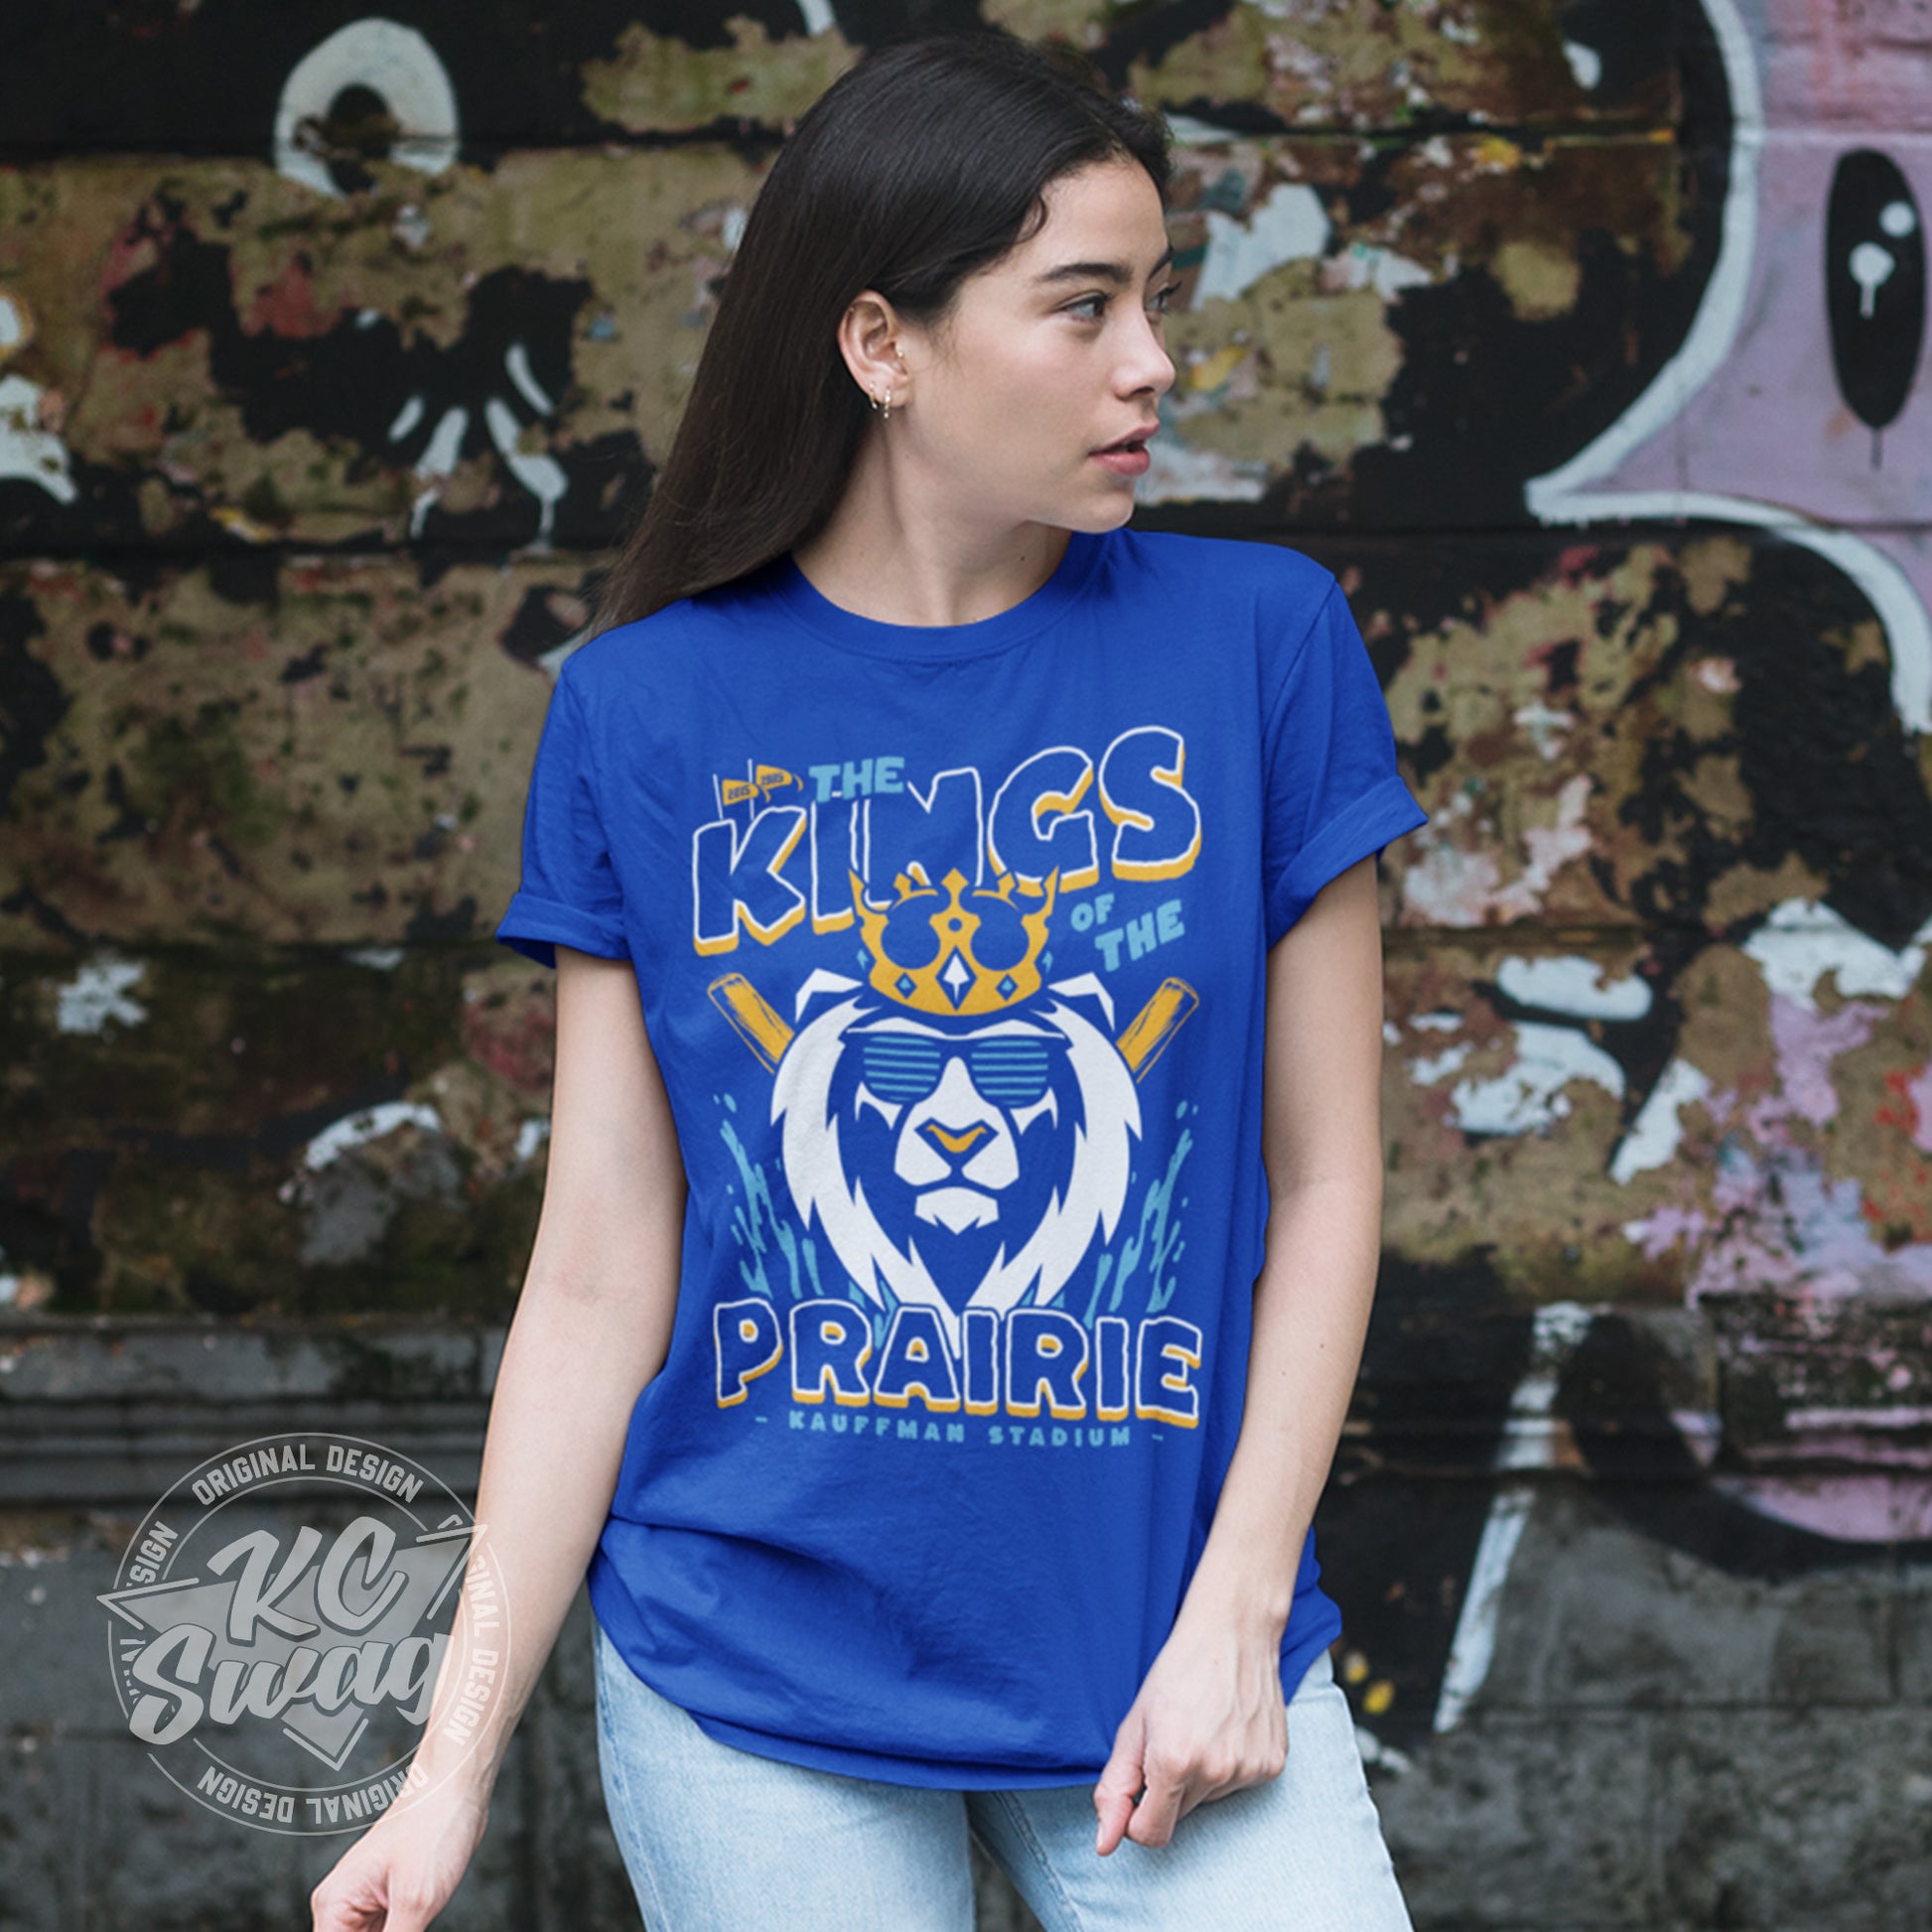 KC Swag - Kansas City Royals, Kings Of The Prairie design on royal blue unisex t-shirt worn by female model standing in front of a grunge graffitied wall in an urban alley